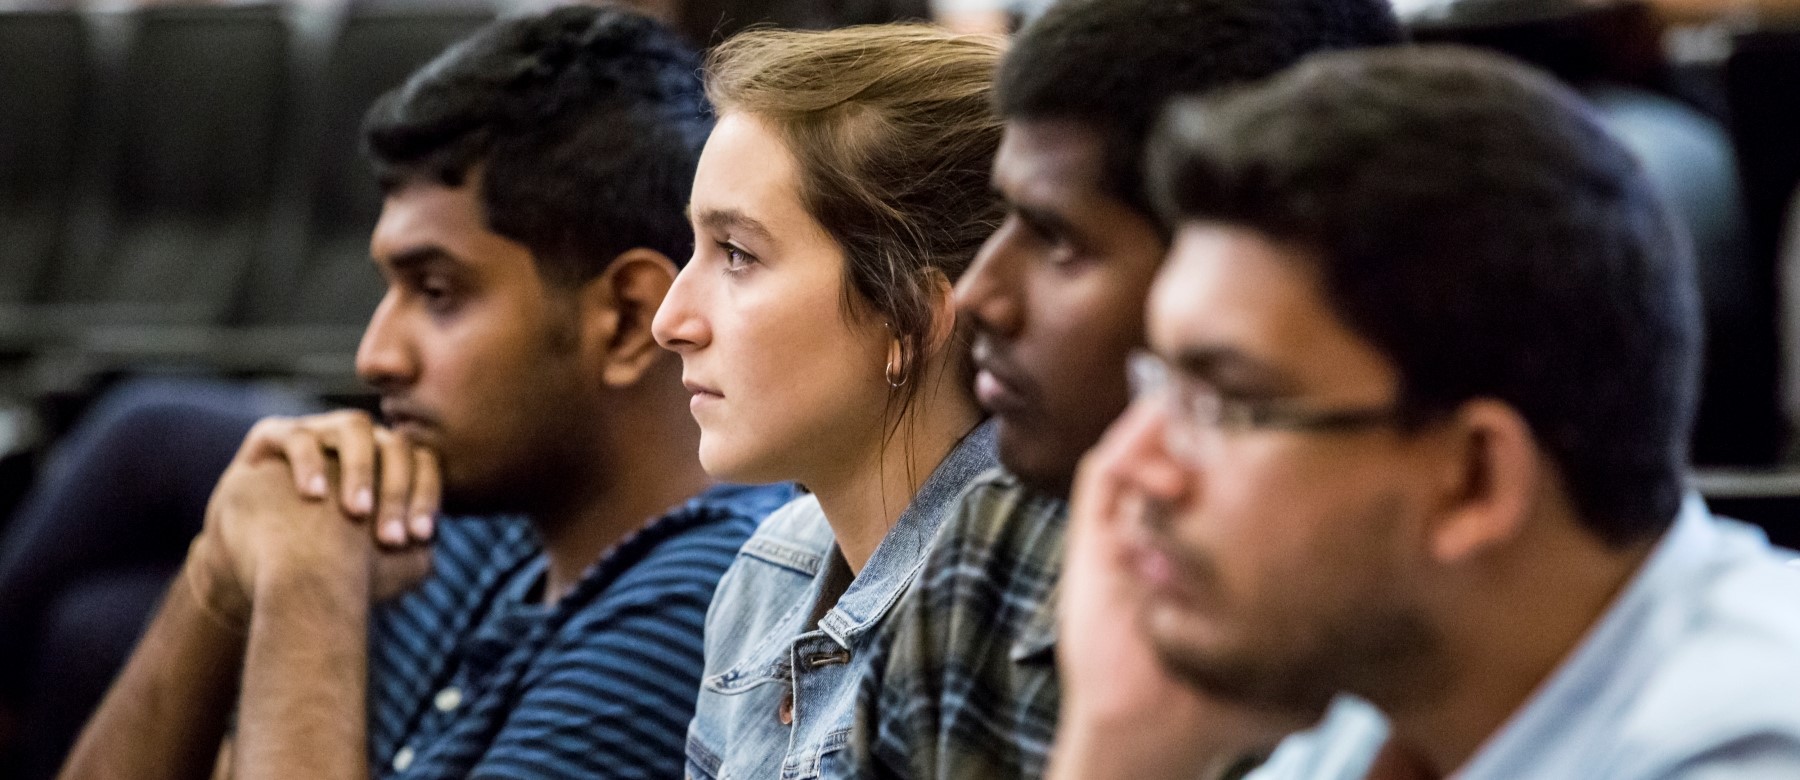 a row of students listen intently to a classroom presentation